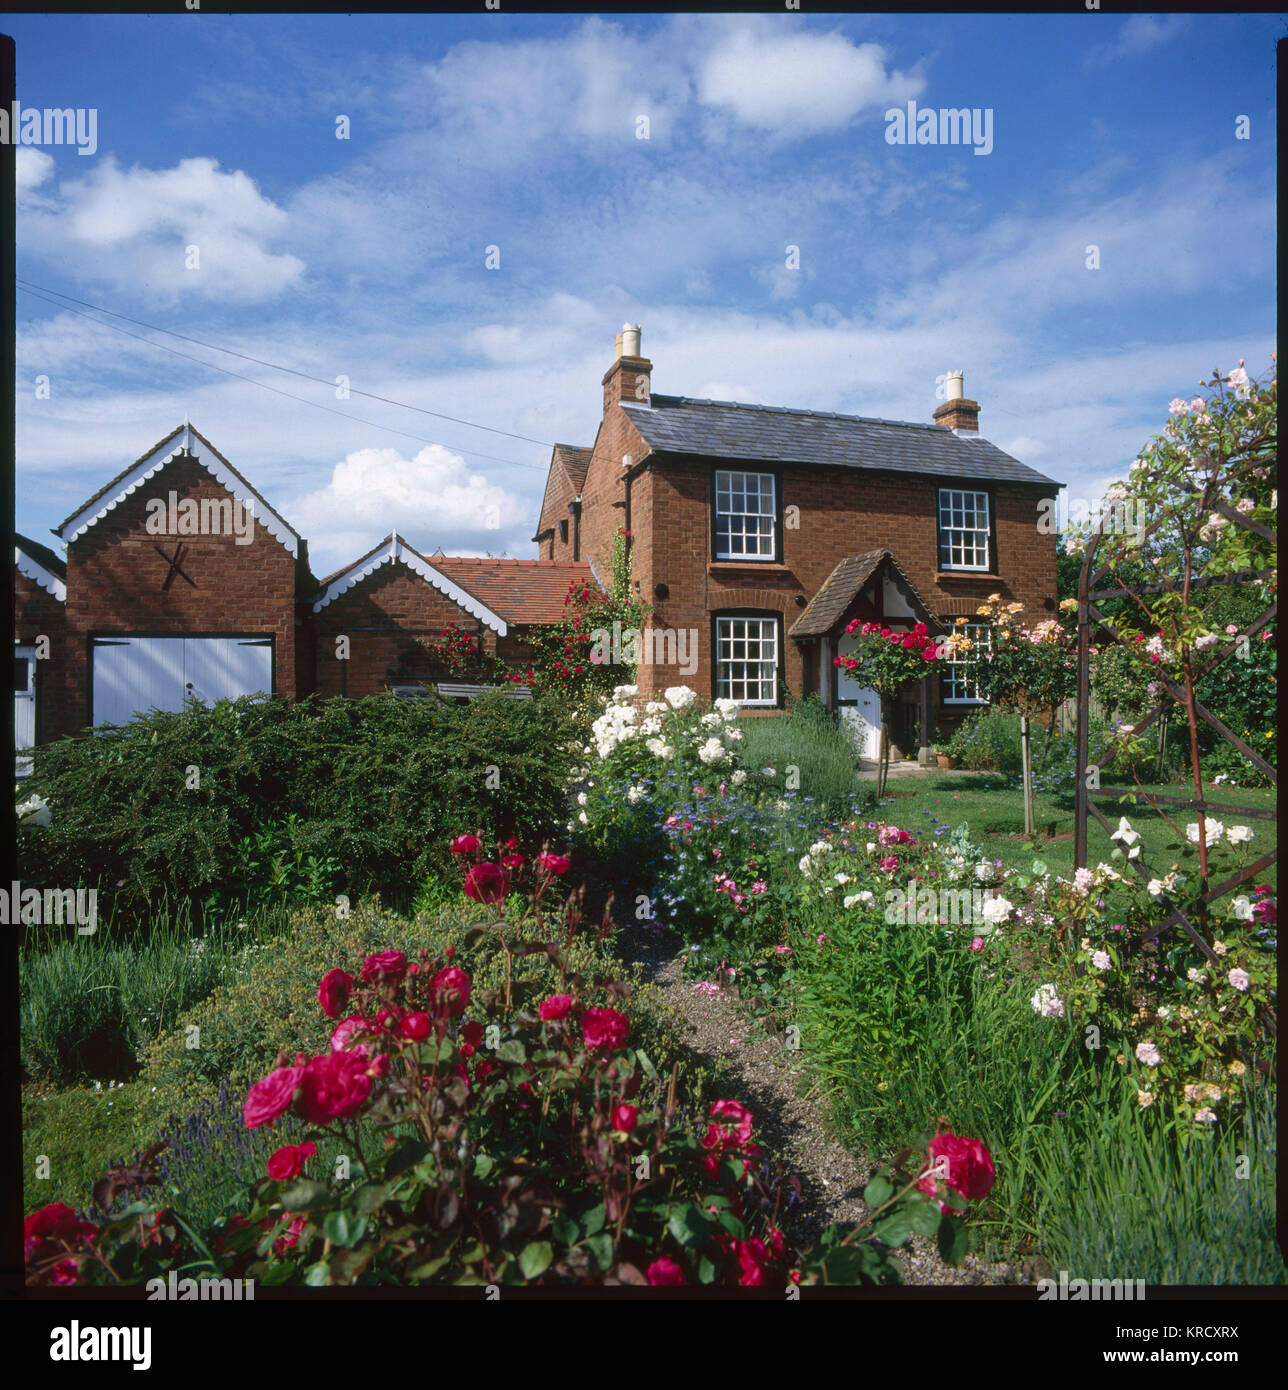 SIR EDWARD ELGAR This lovely English country  house, with roses in the  garden, is the birthplace of  composer Sir Edward Elgar (1857 - 1934).     Date: 1997 Stock Photo